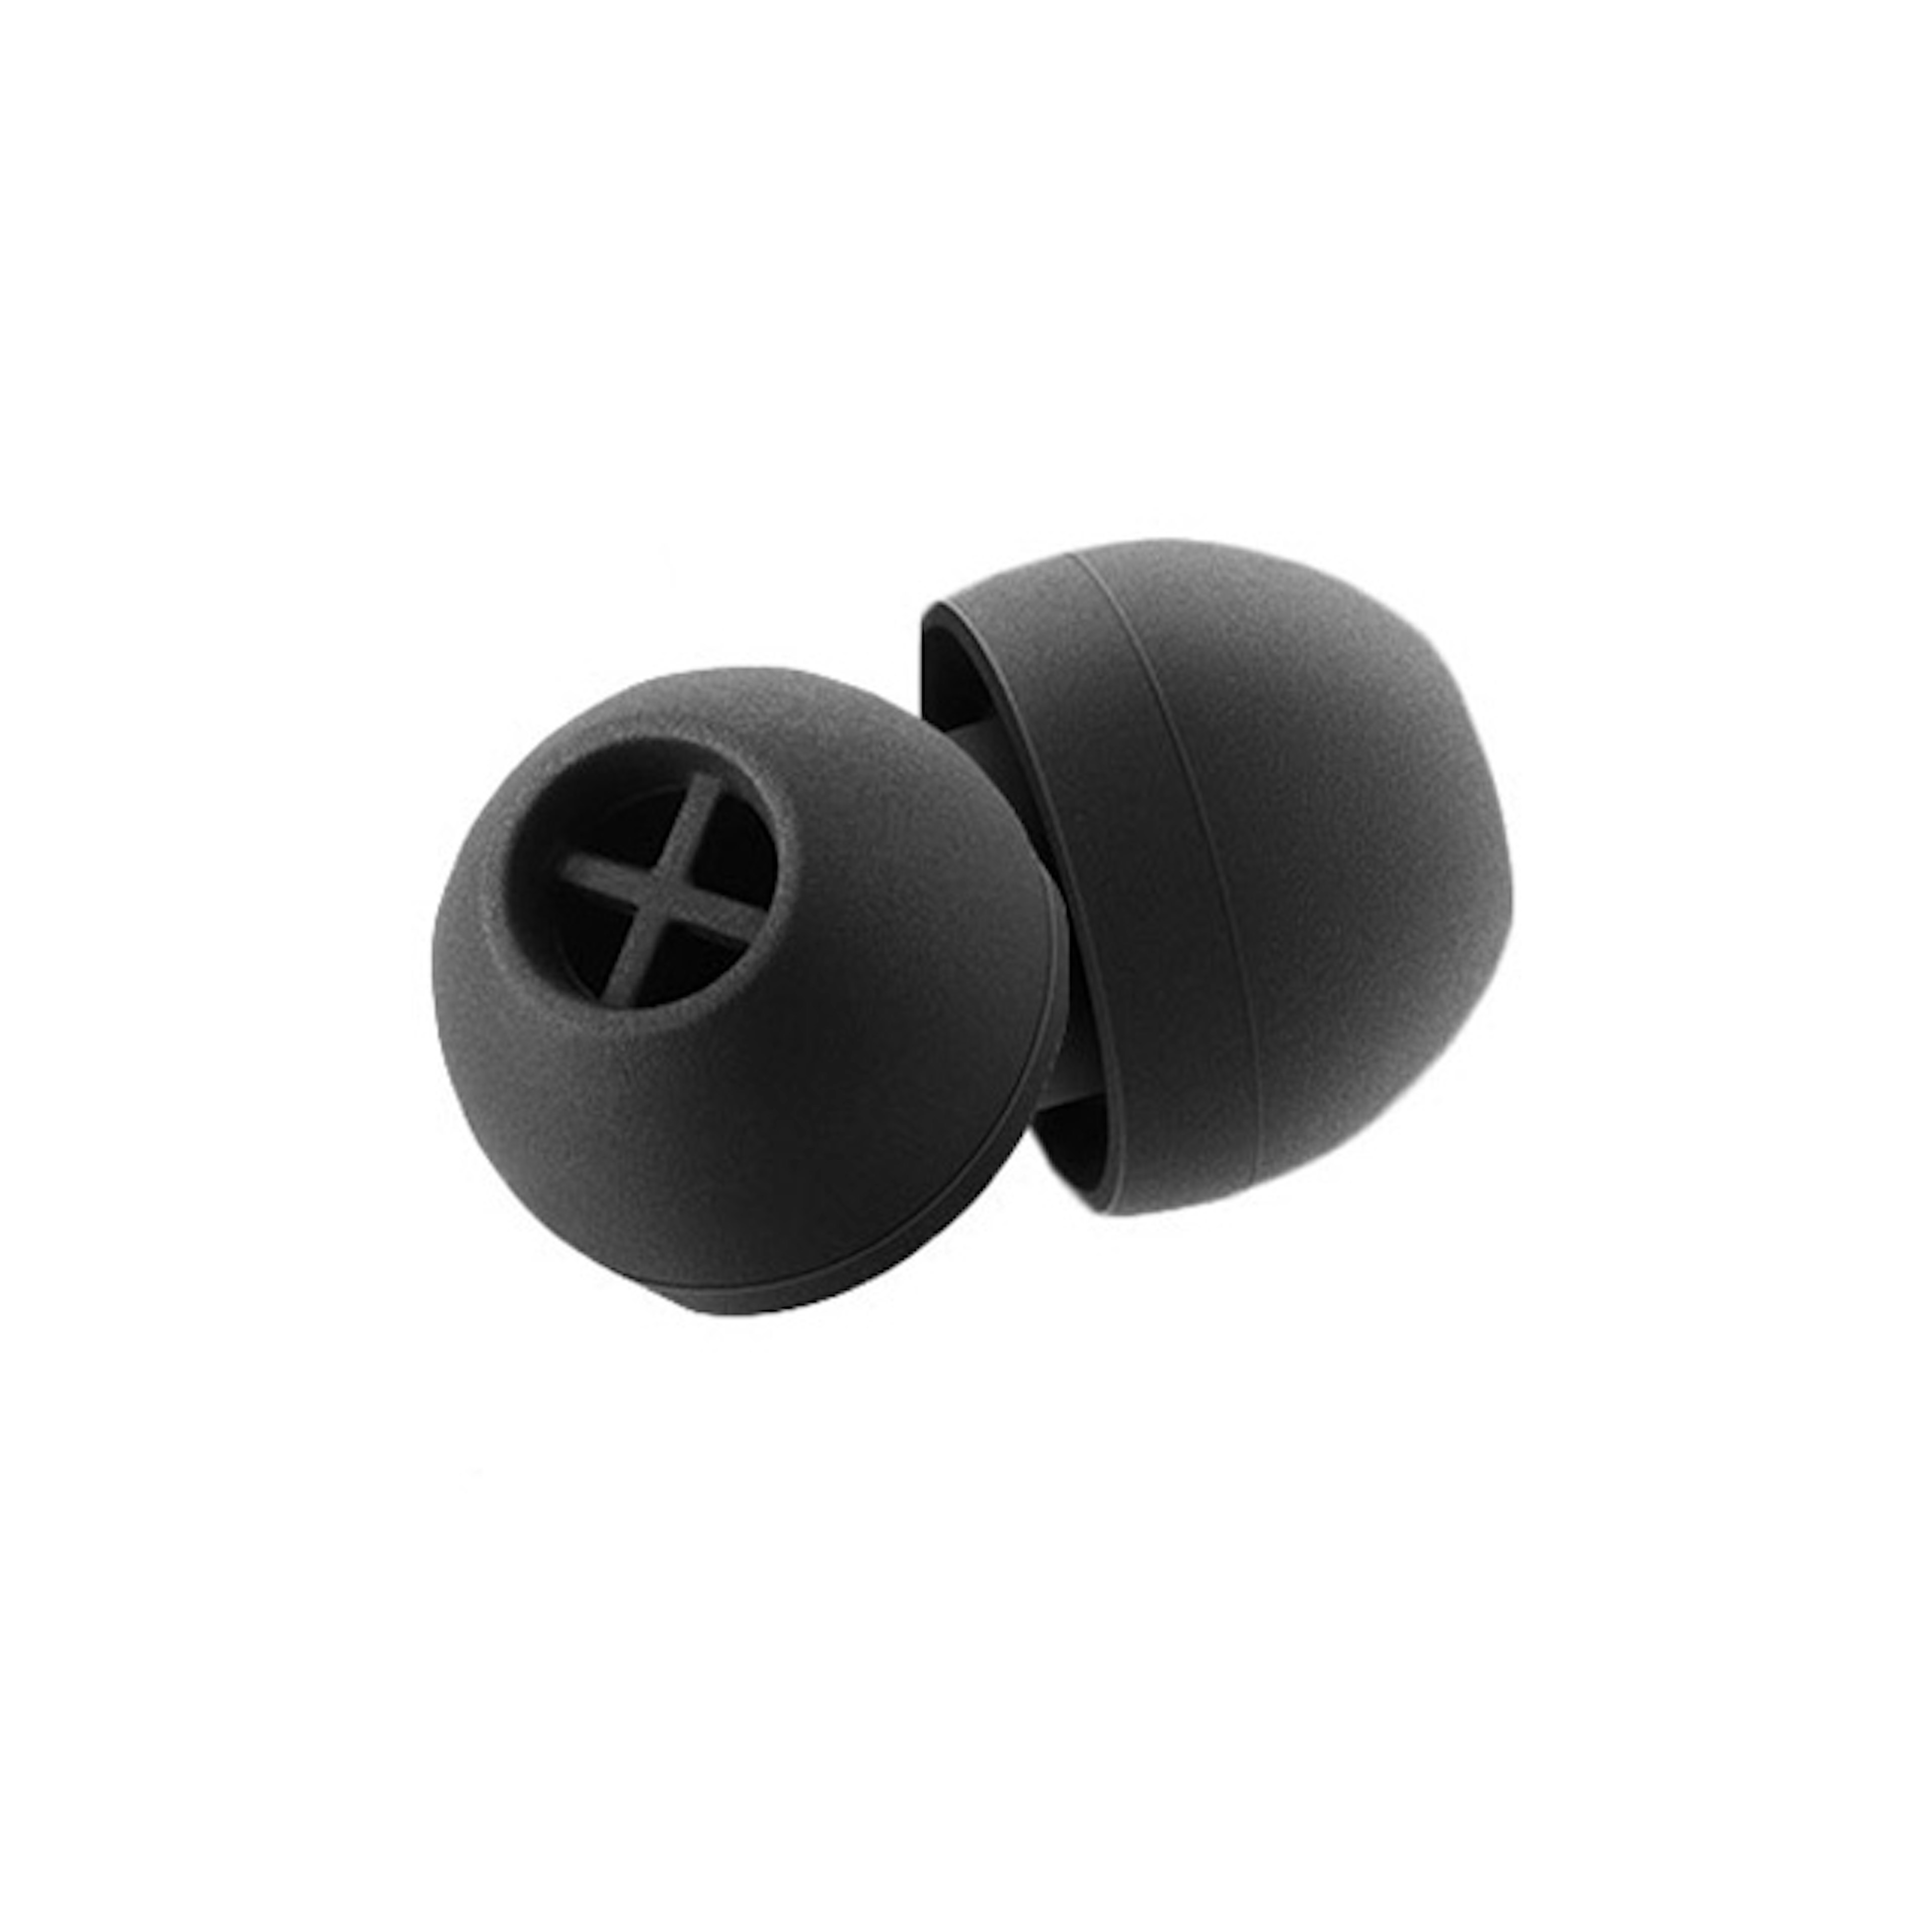 Silicone Ear adapter, black, 5 pair (XS)